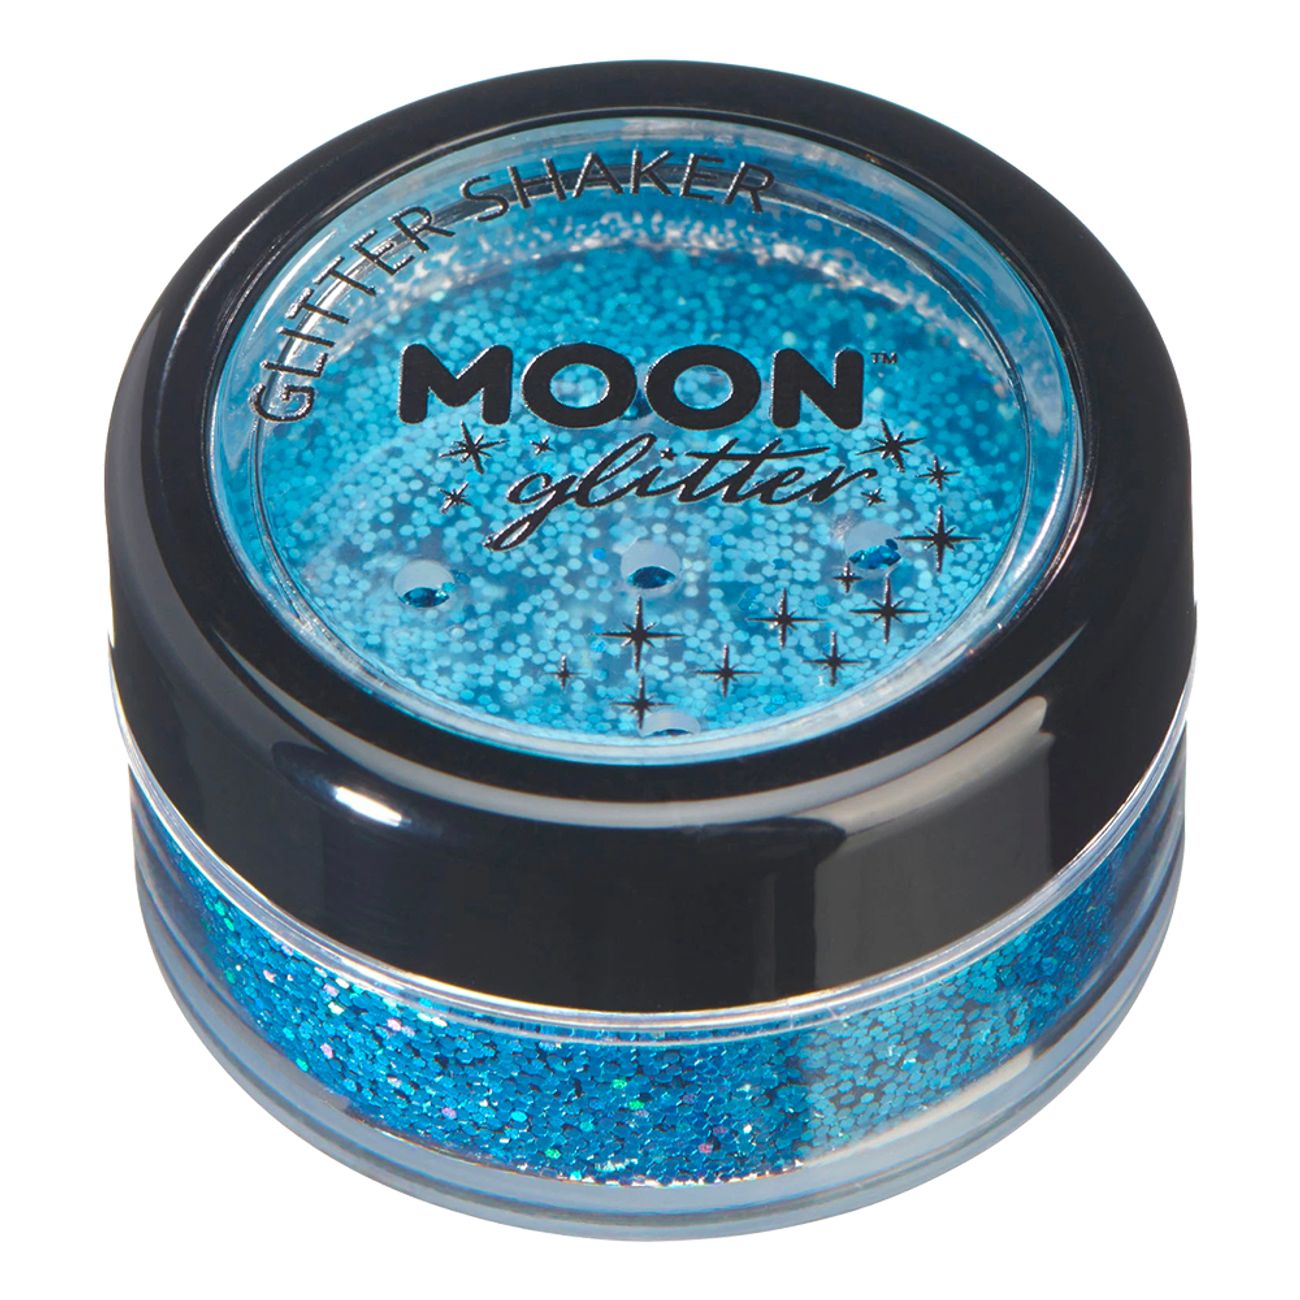 moon-creations-glitter-holographic-glitter-shakers-79749-7